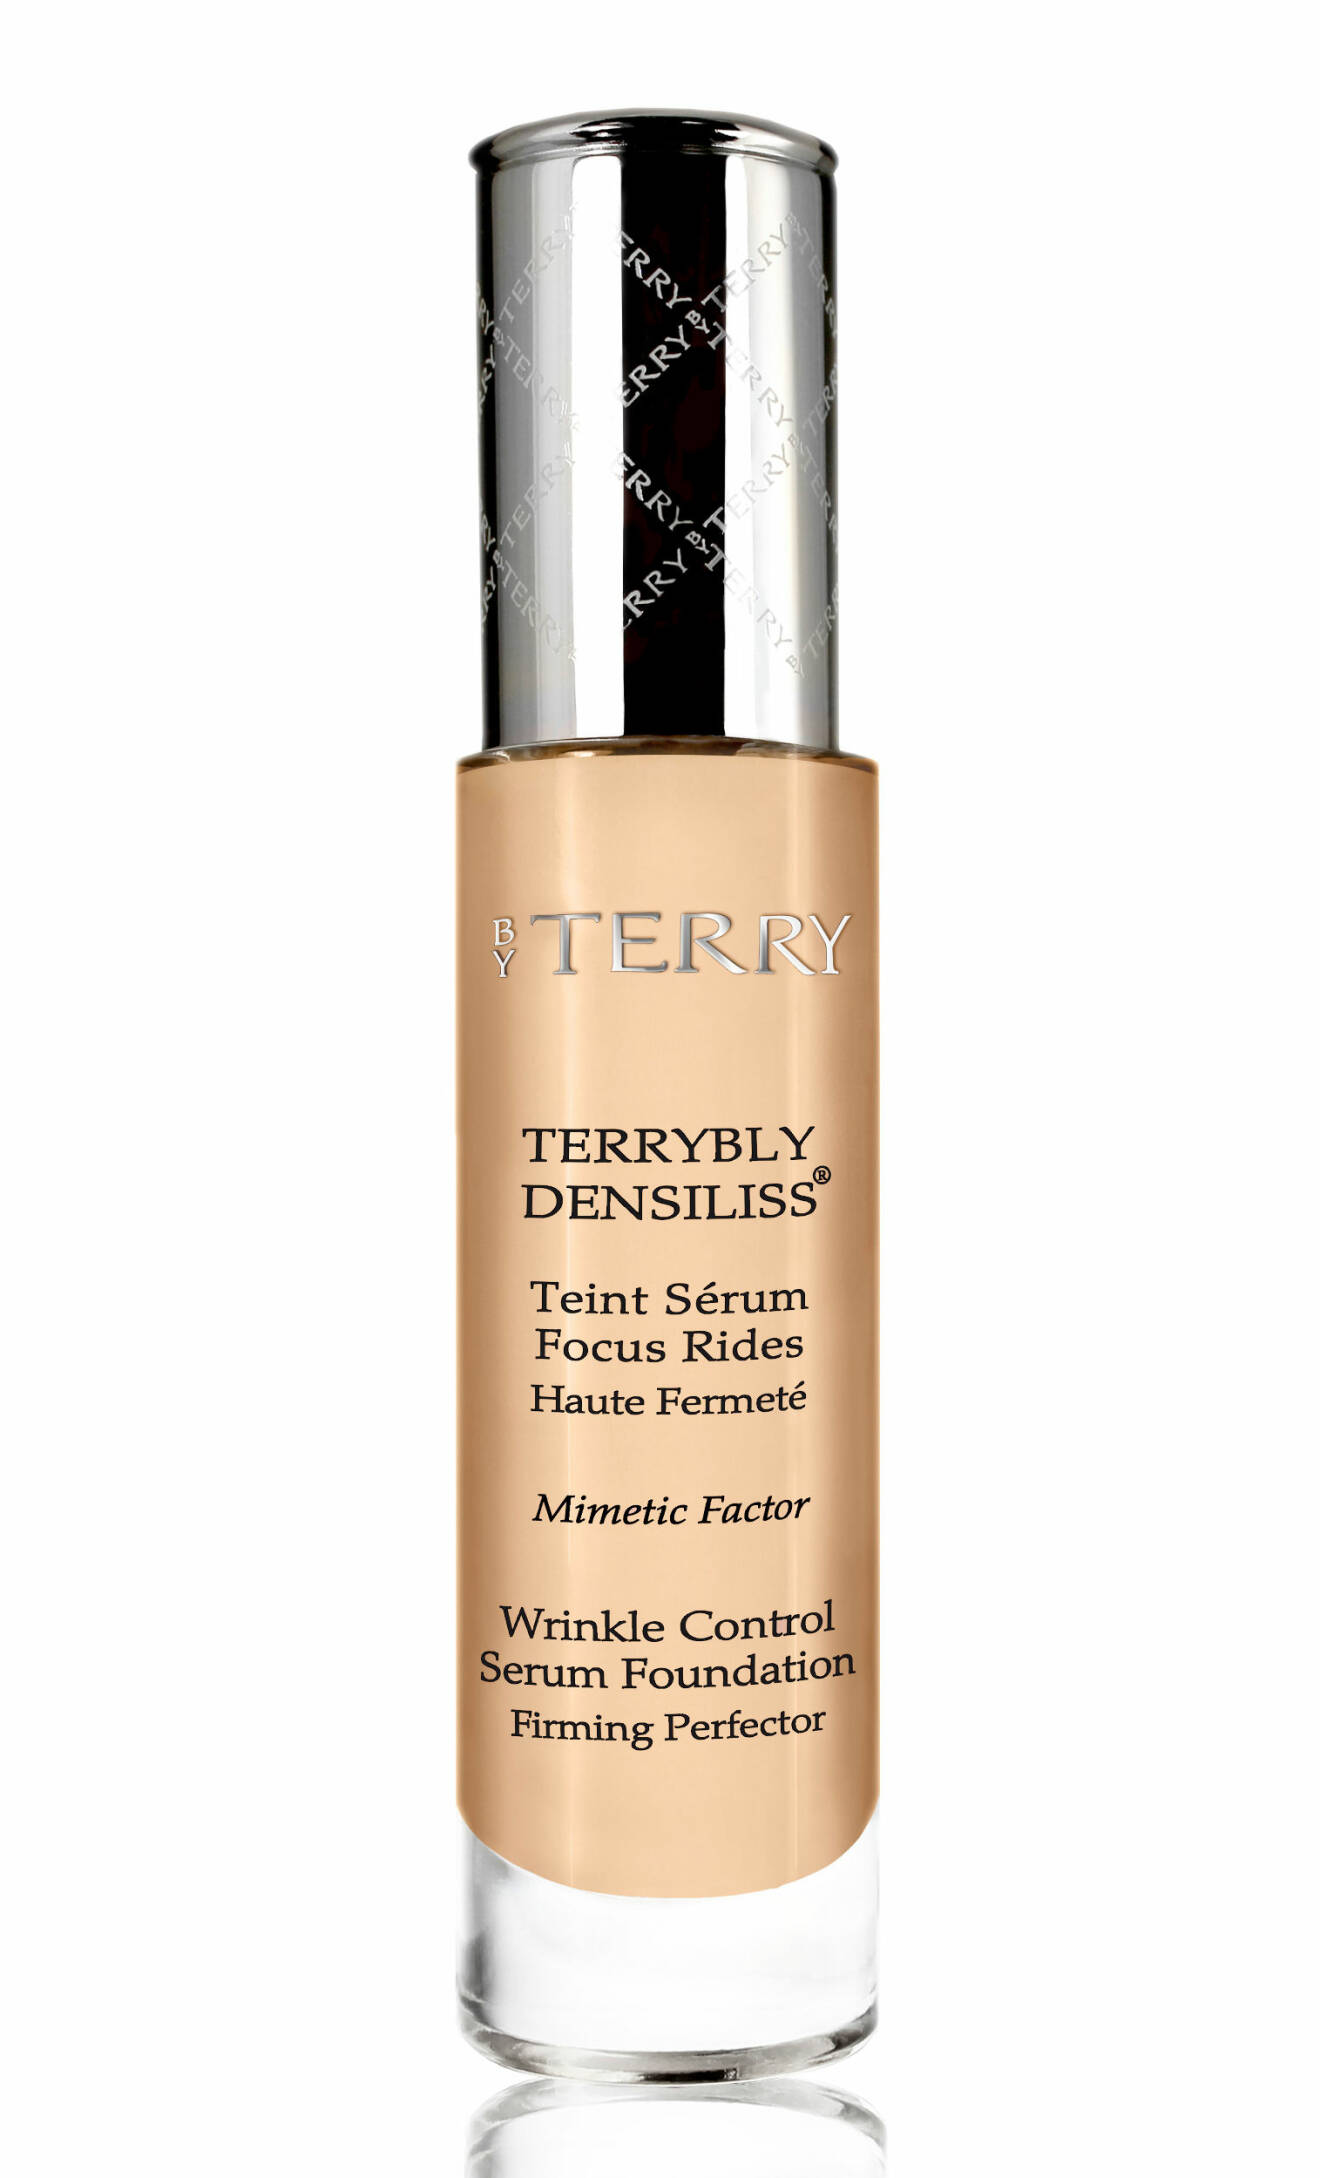 Terribly Densiliss Wrinkle Control Serum Foundation från By Terry.